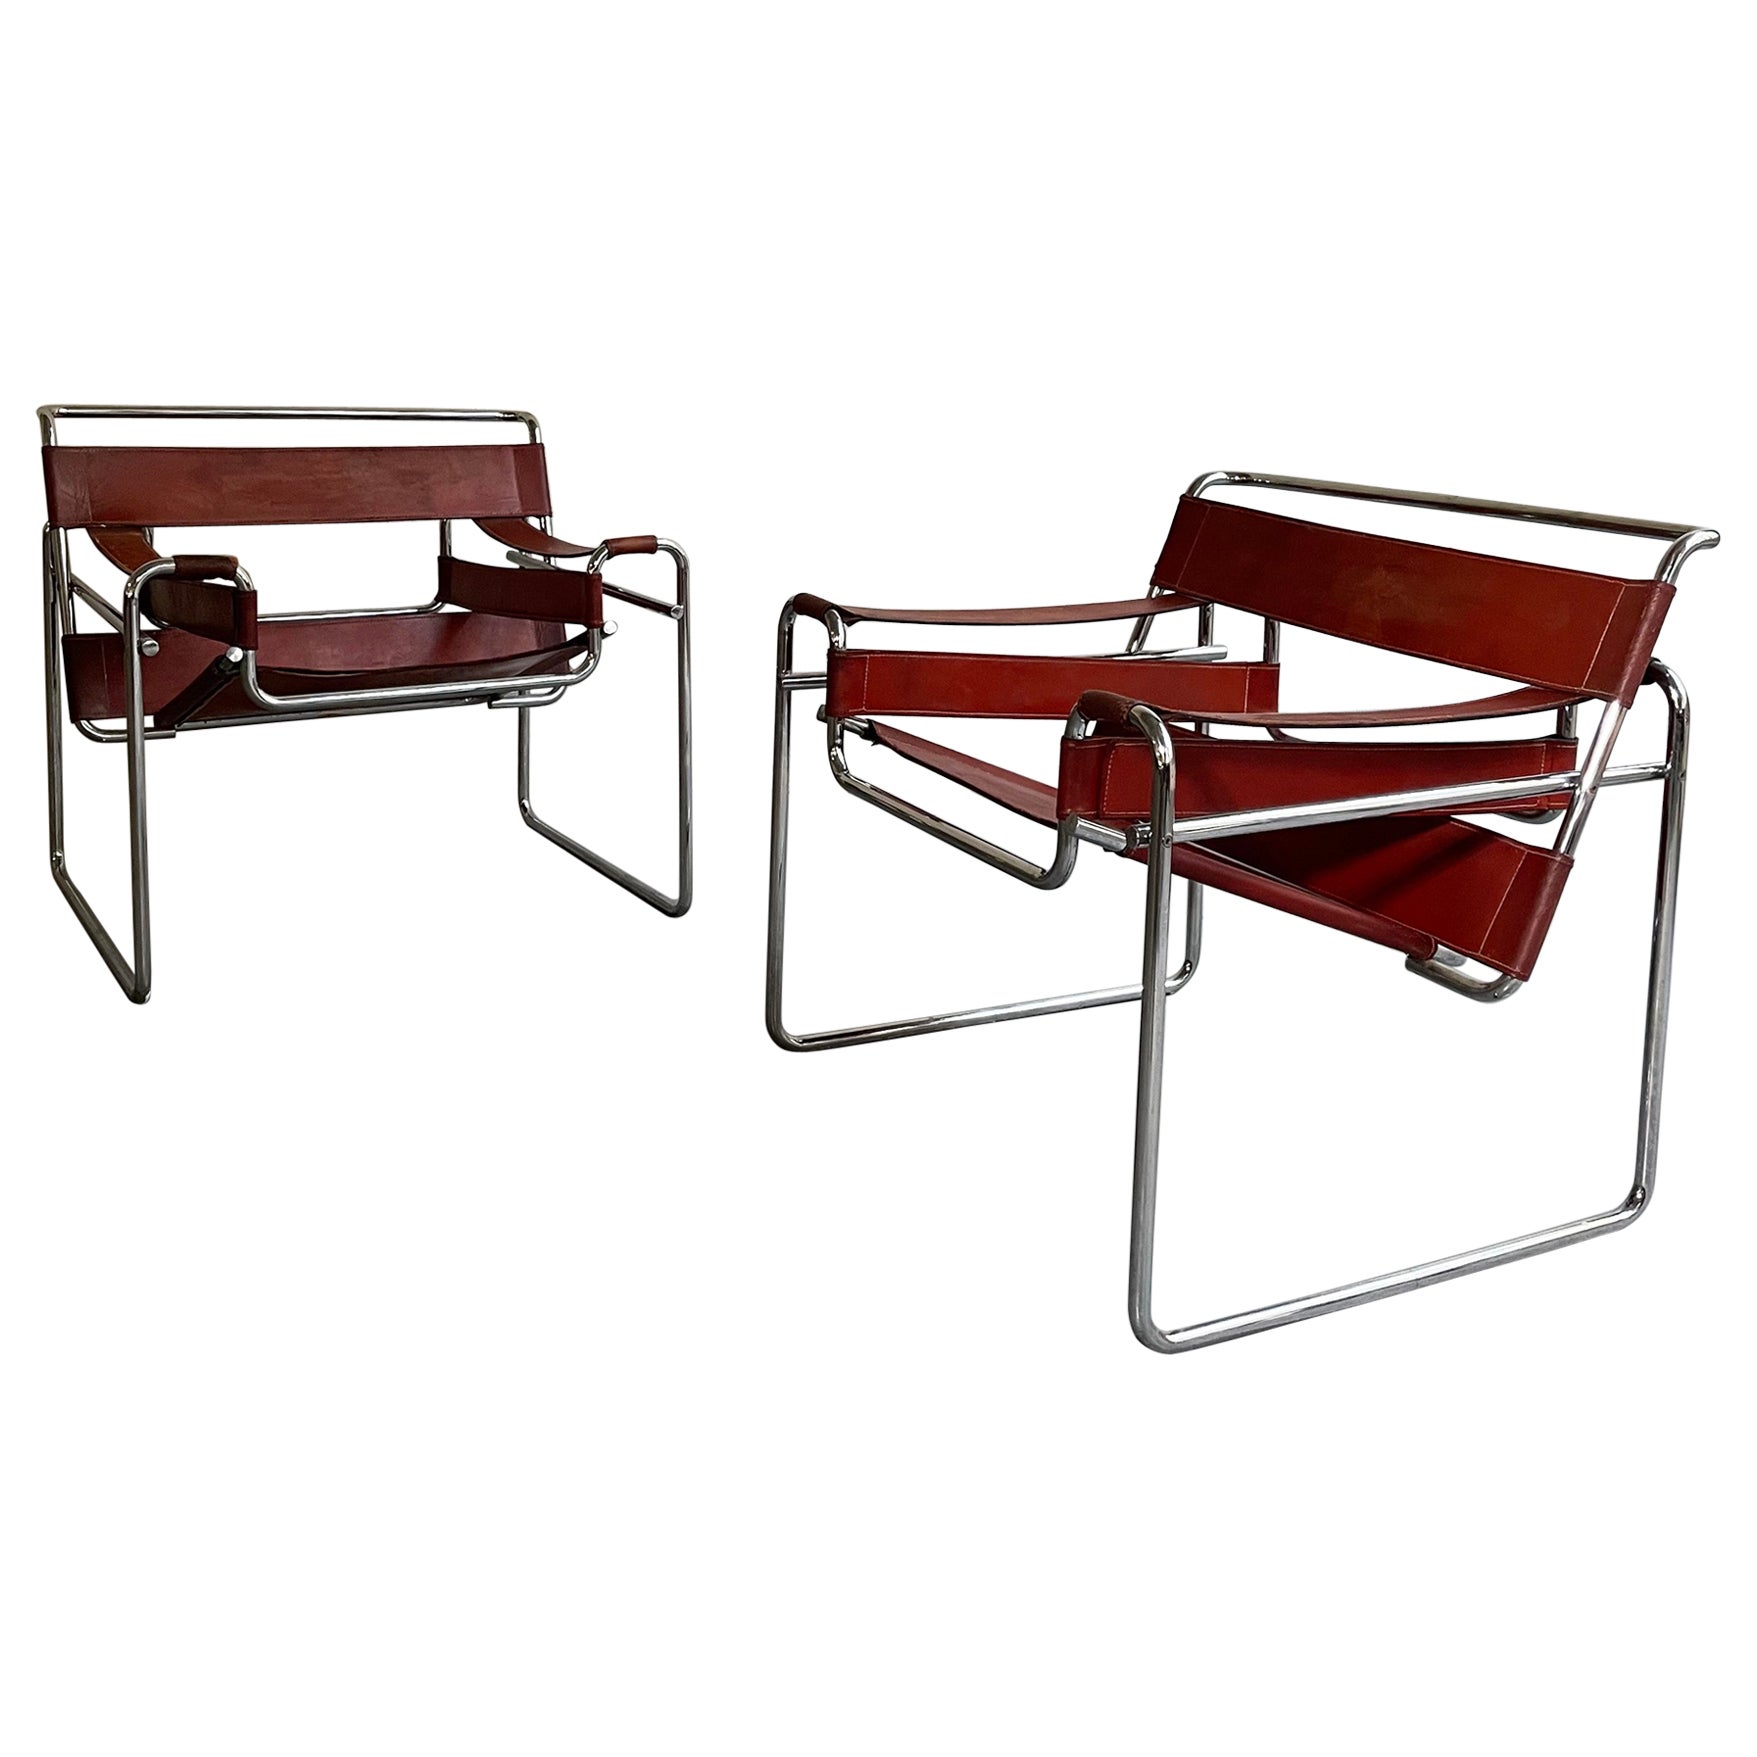 Marcel Breuer Bauhaus Wassily Style Chairs Burgundy Brown Leather